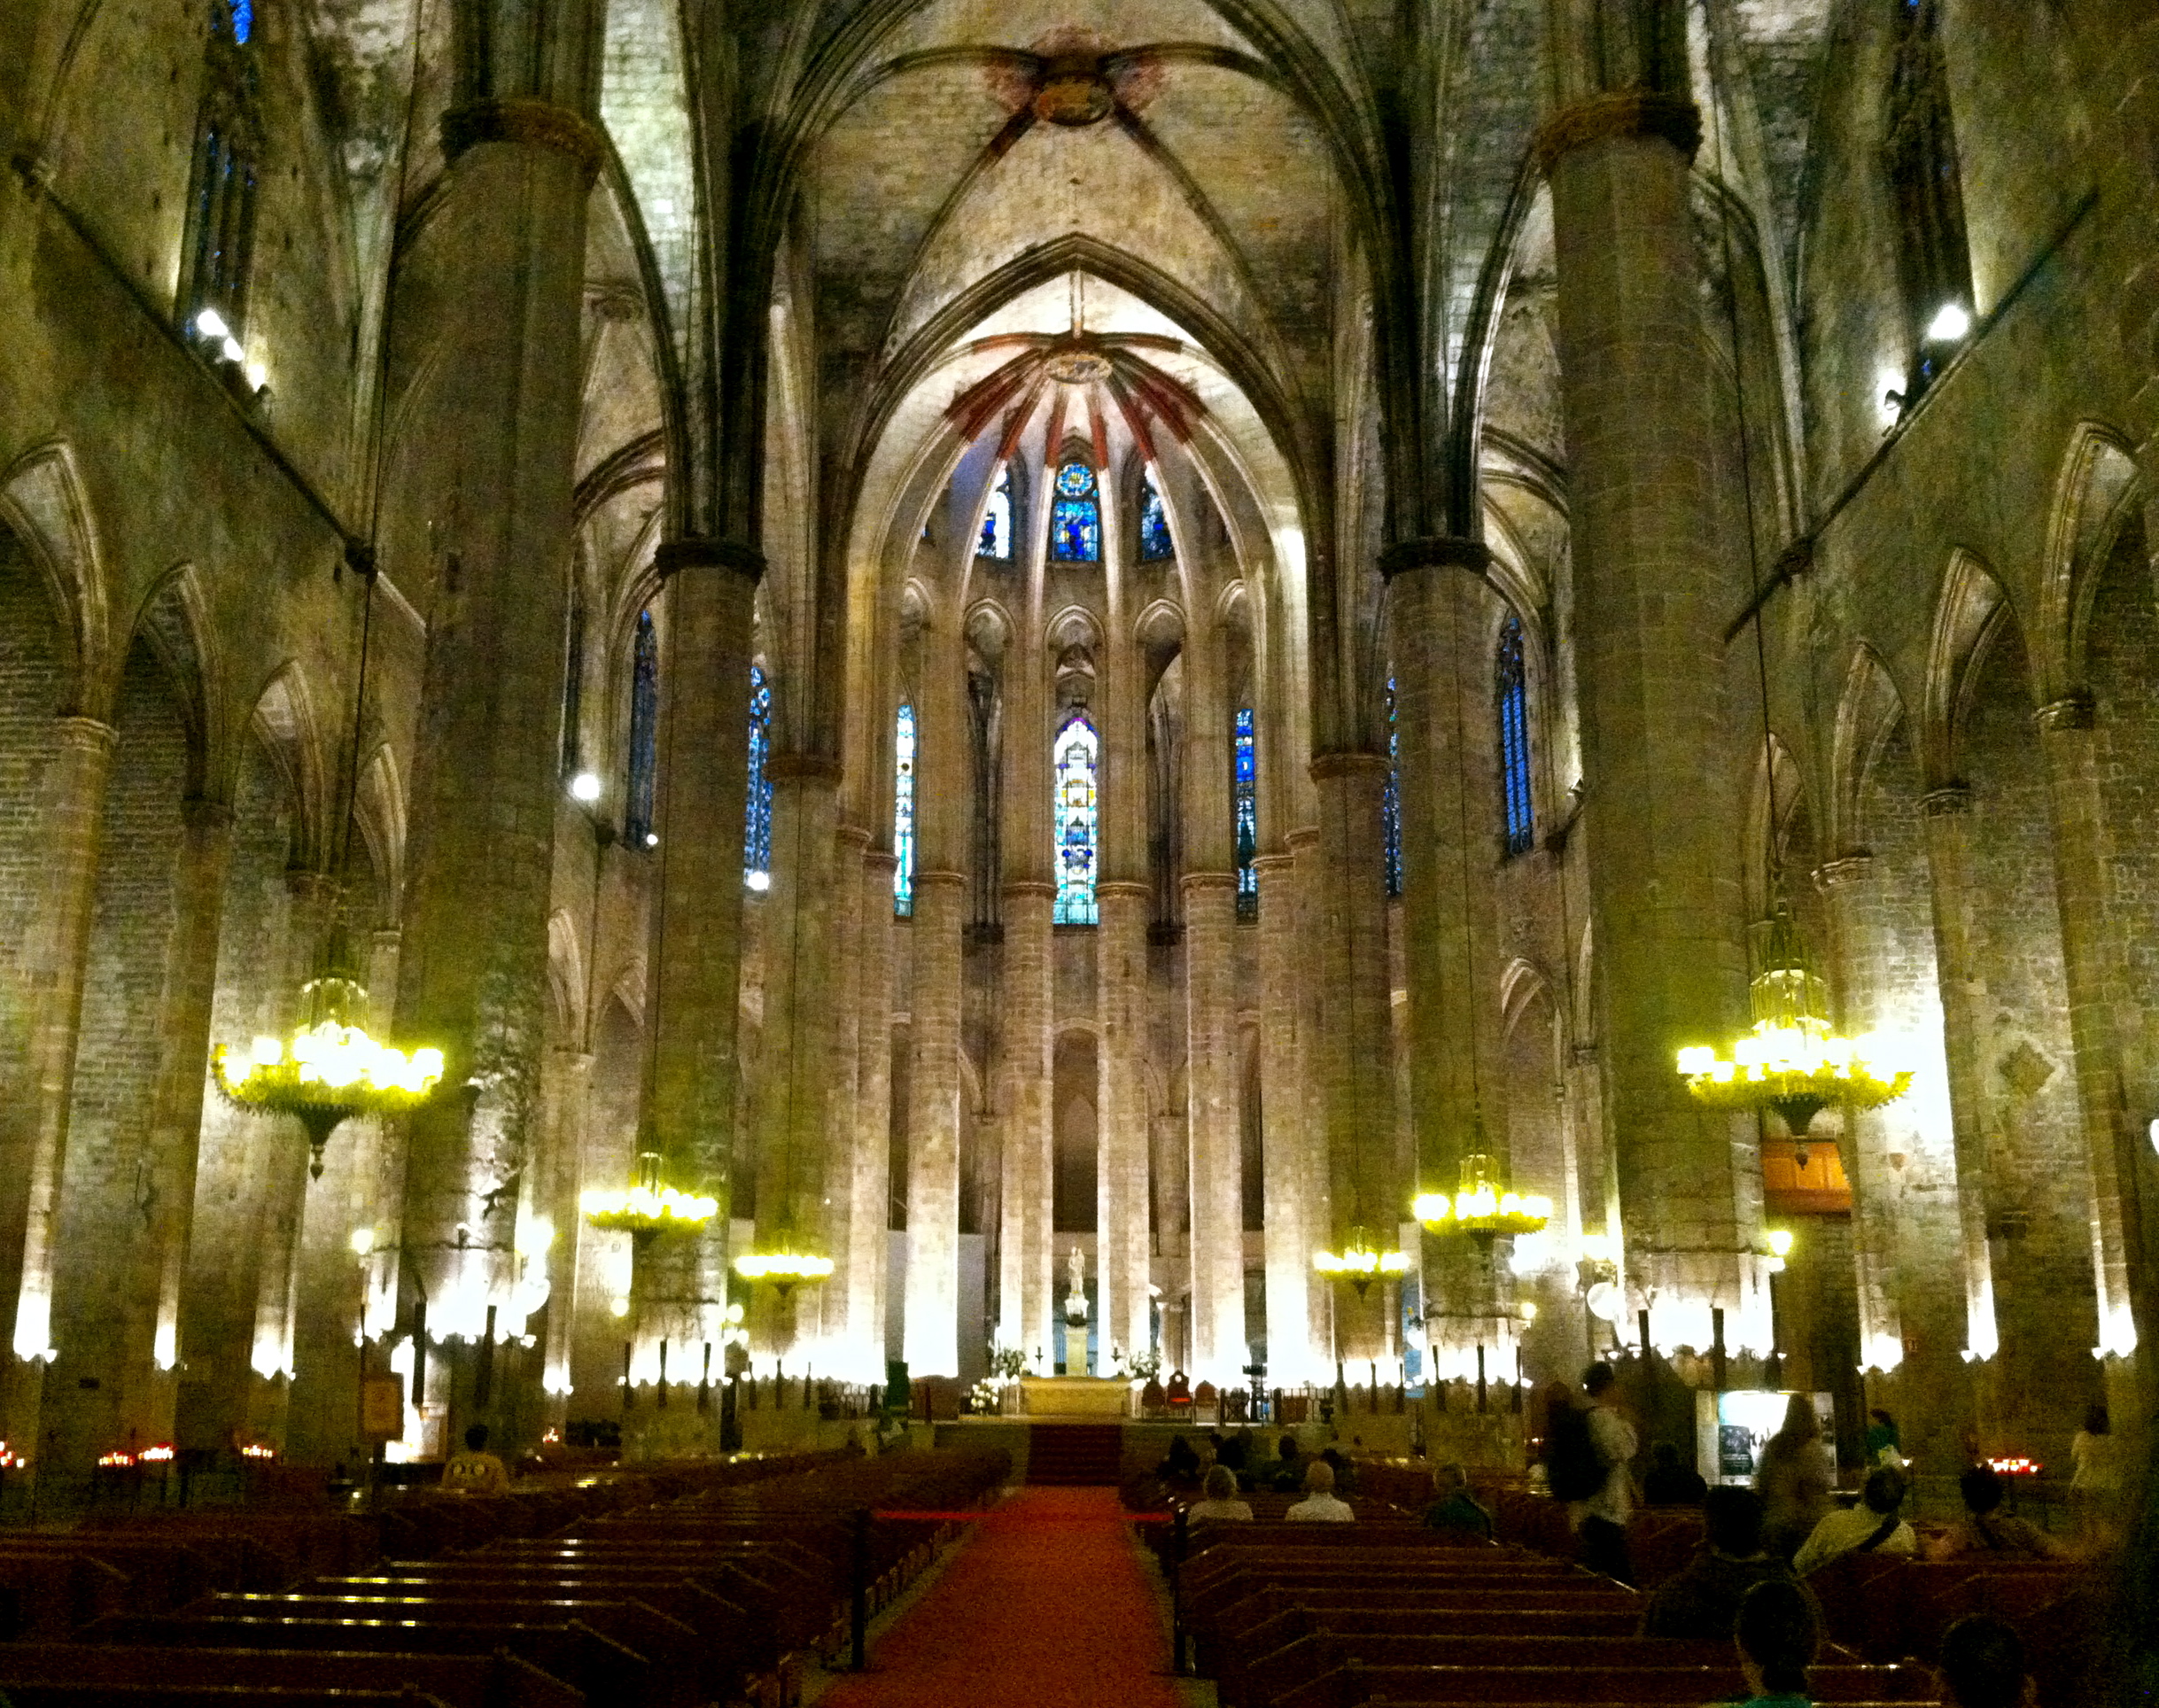 One of the many beautiful cathedrals in Barcelona, Spain